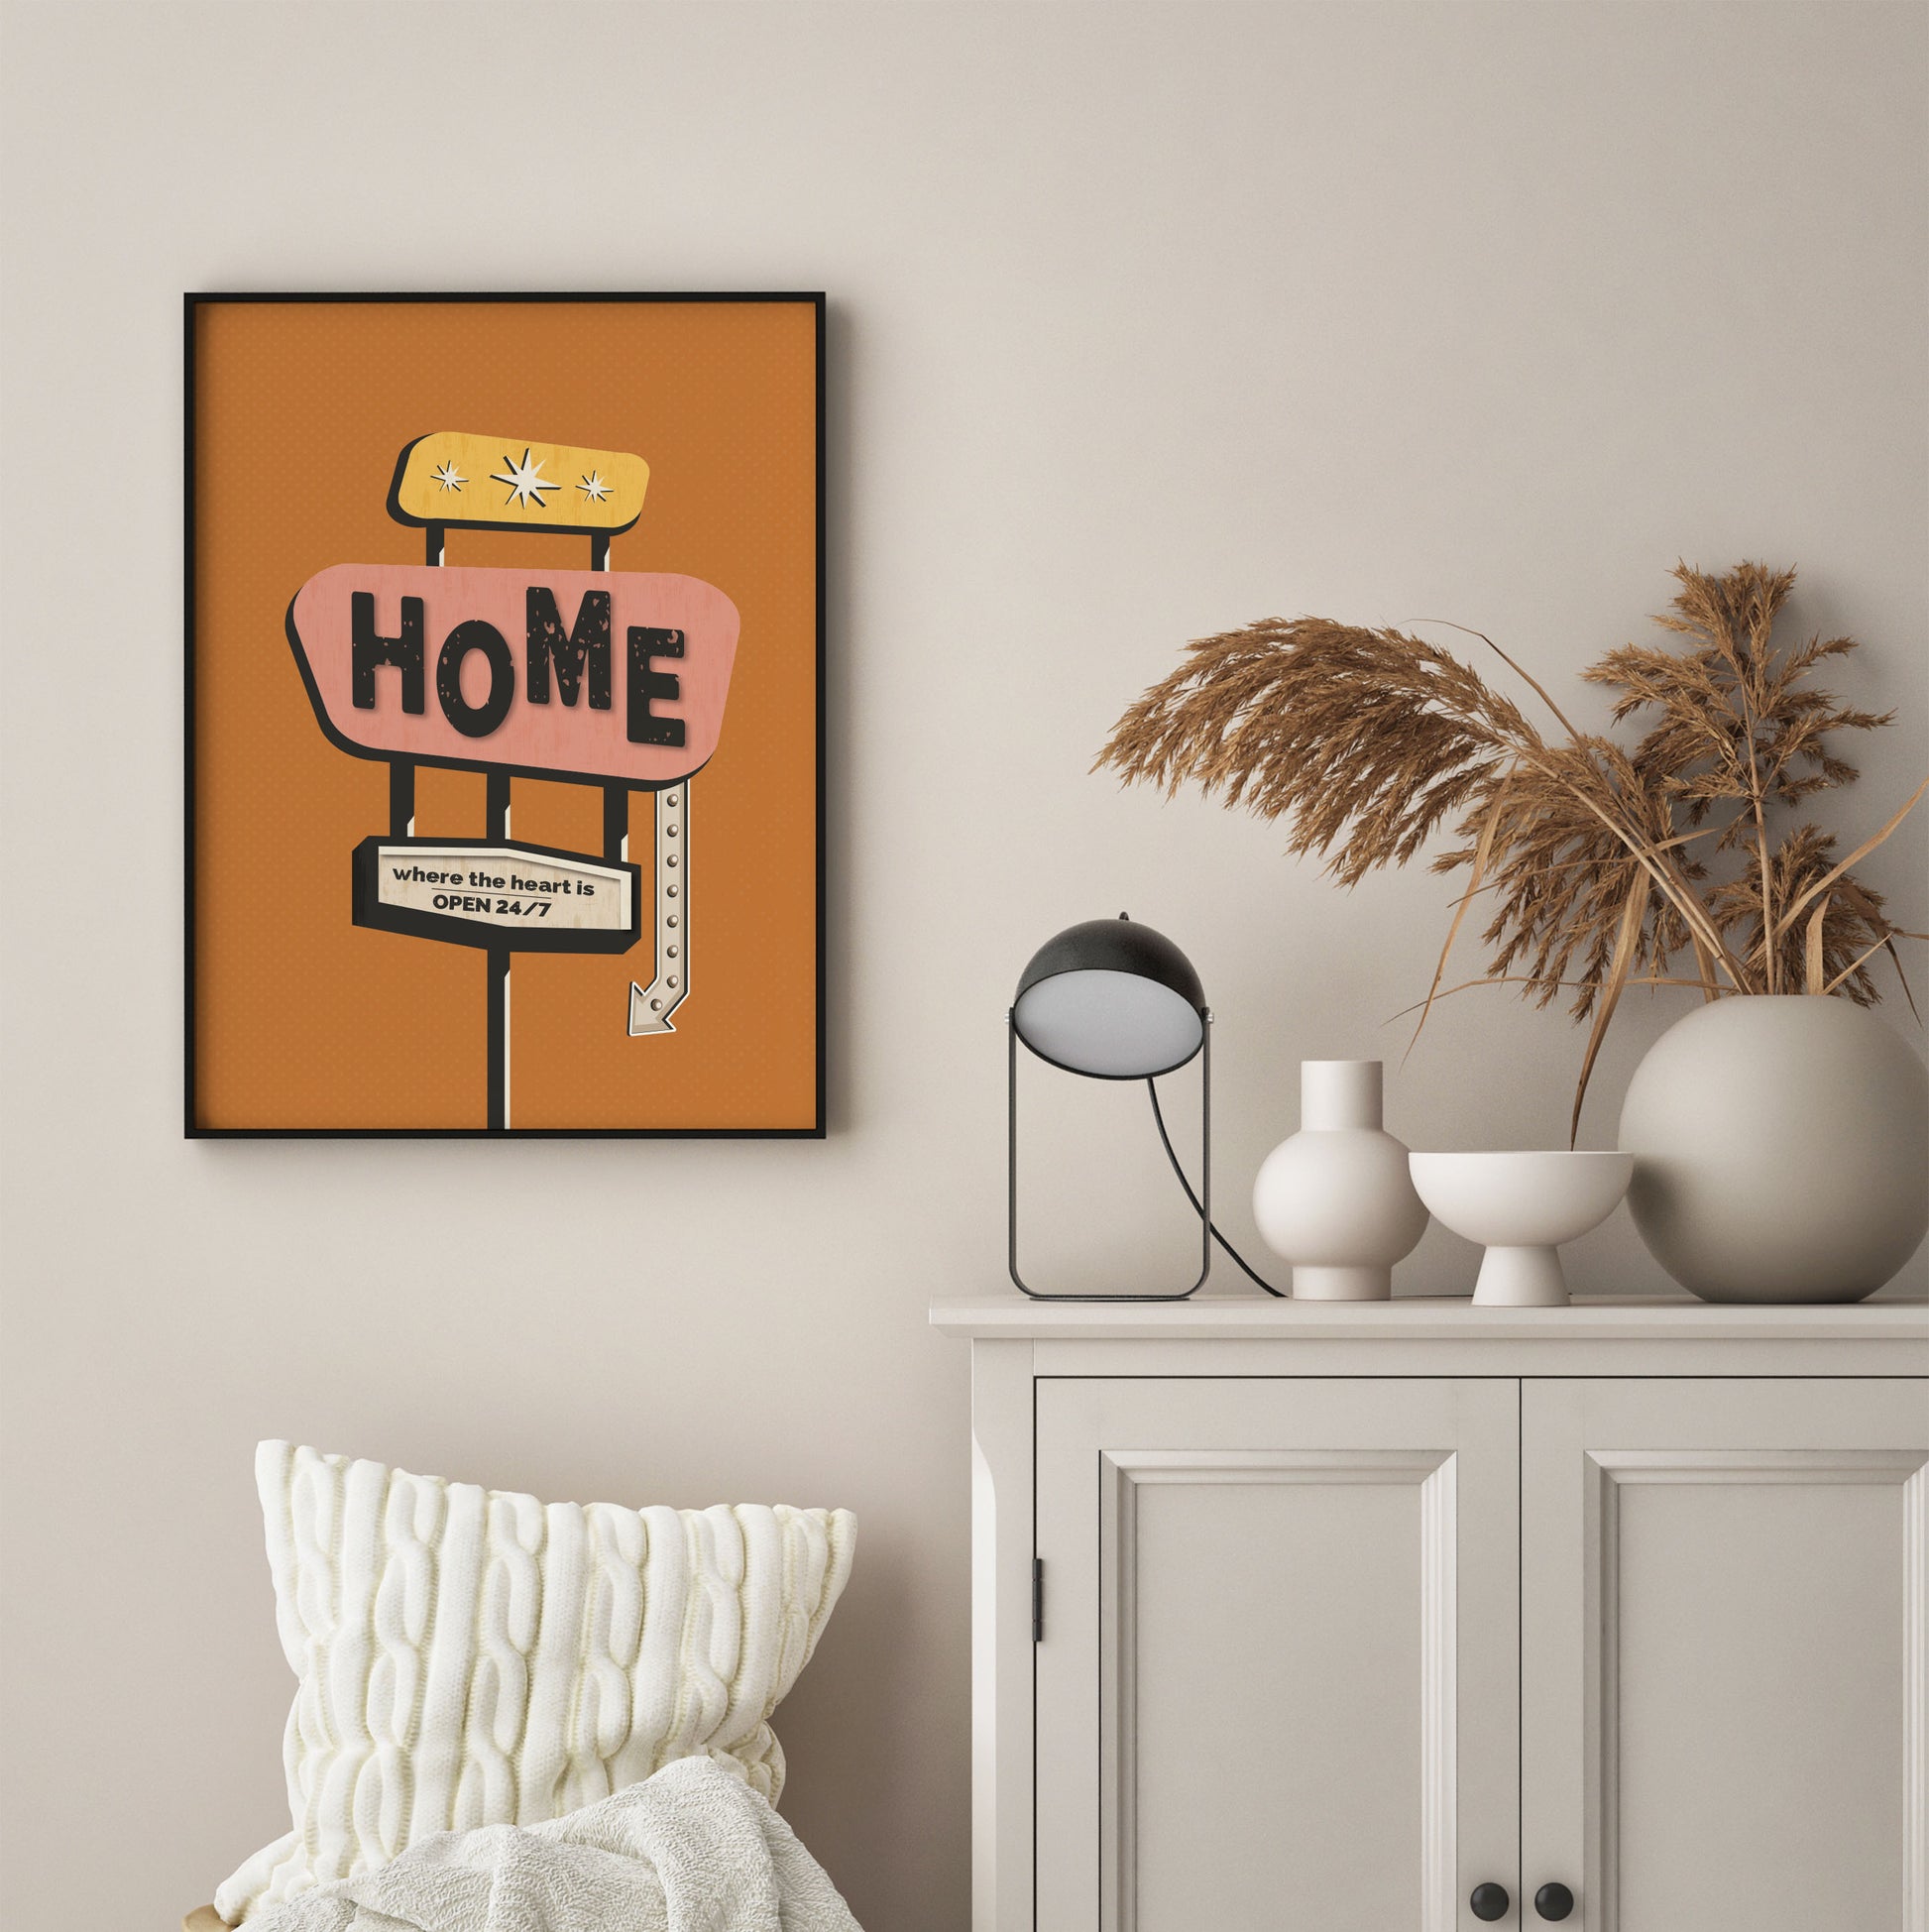 Home sign poster in orange, with a mid century modern style